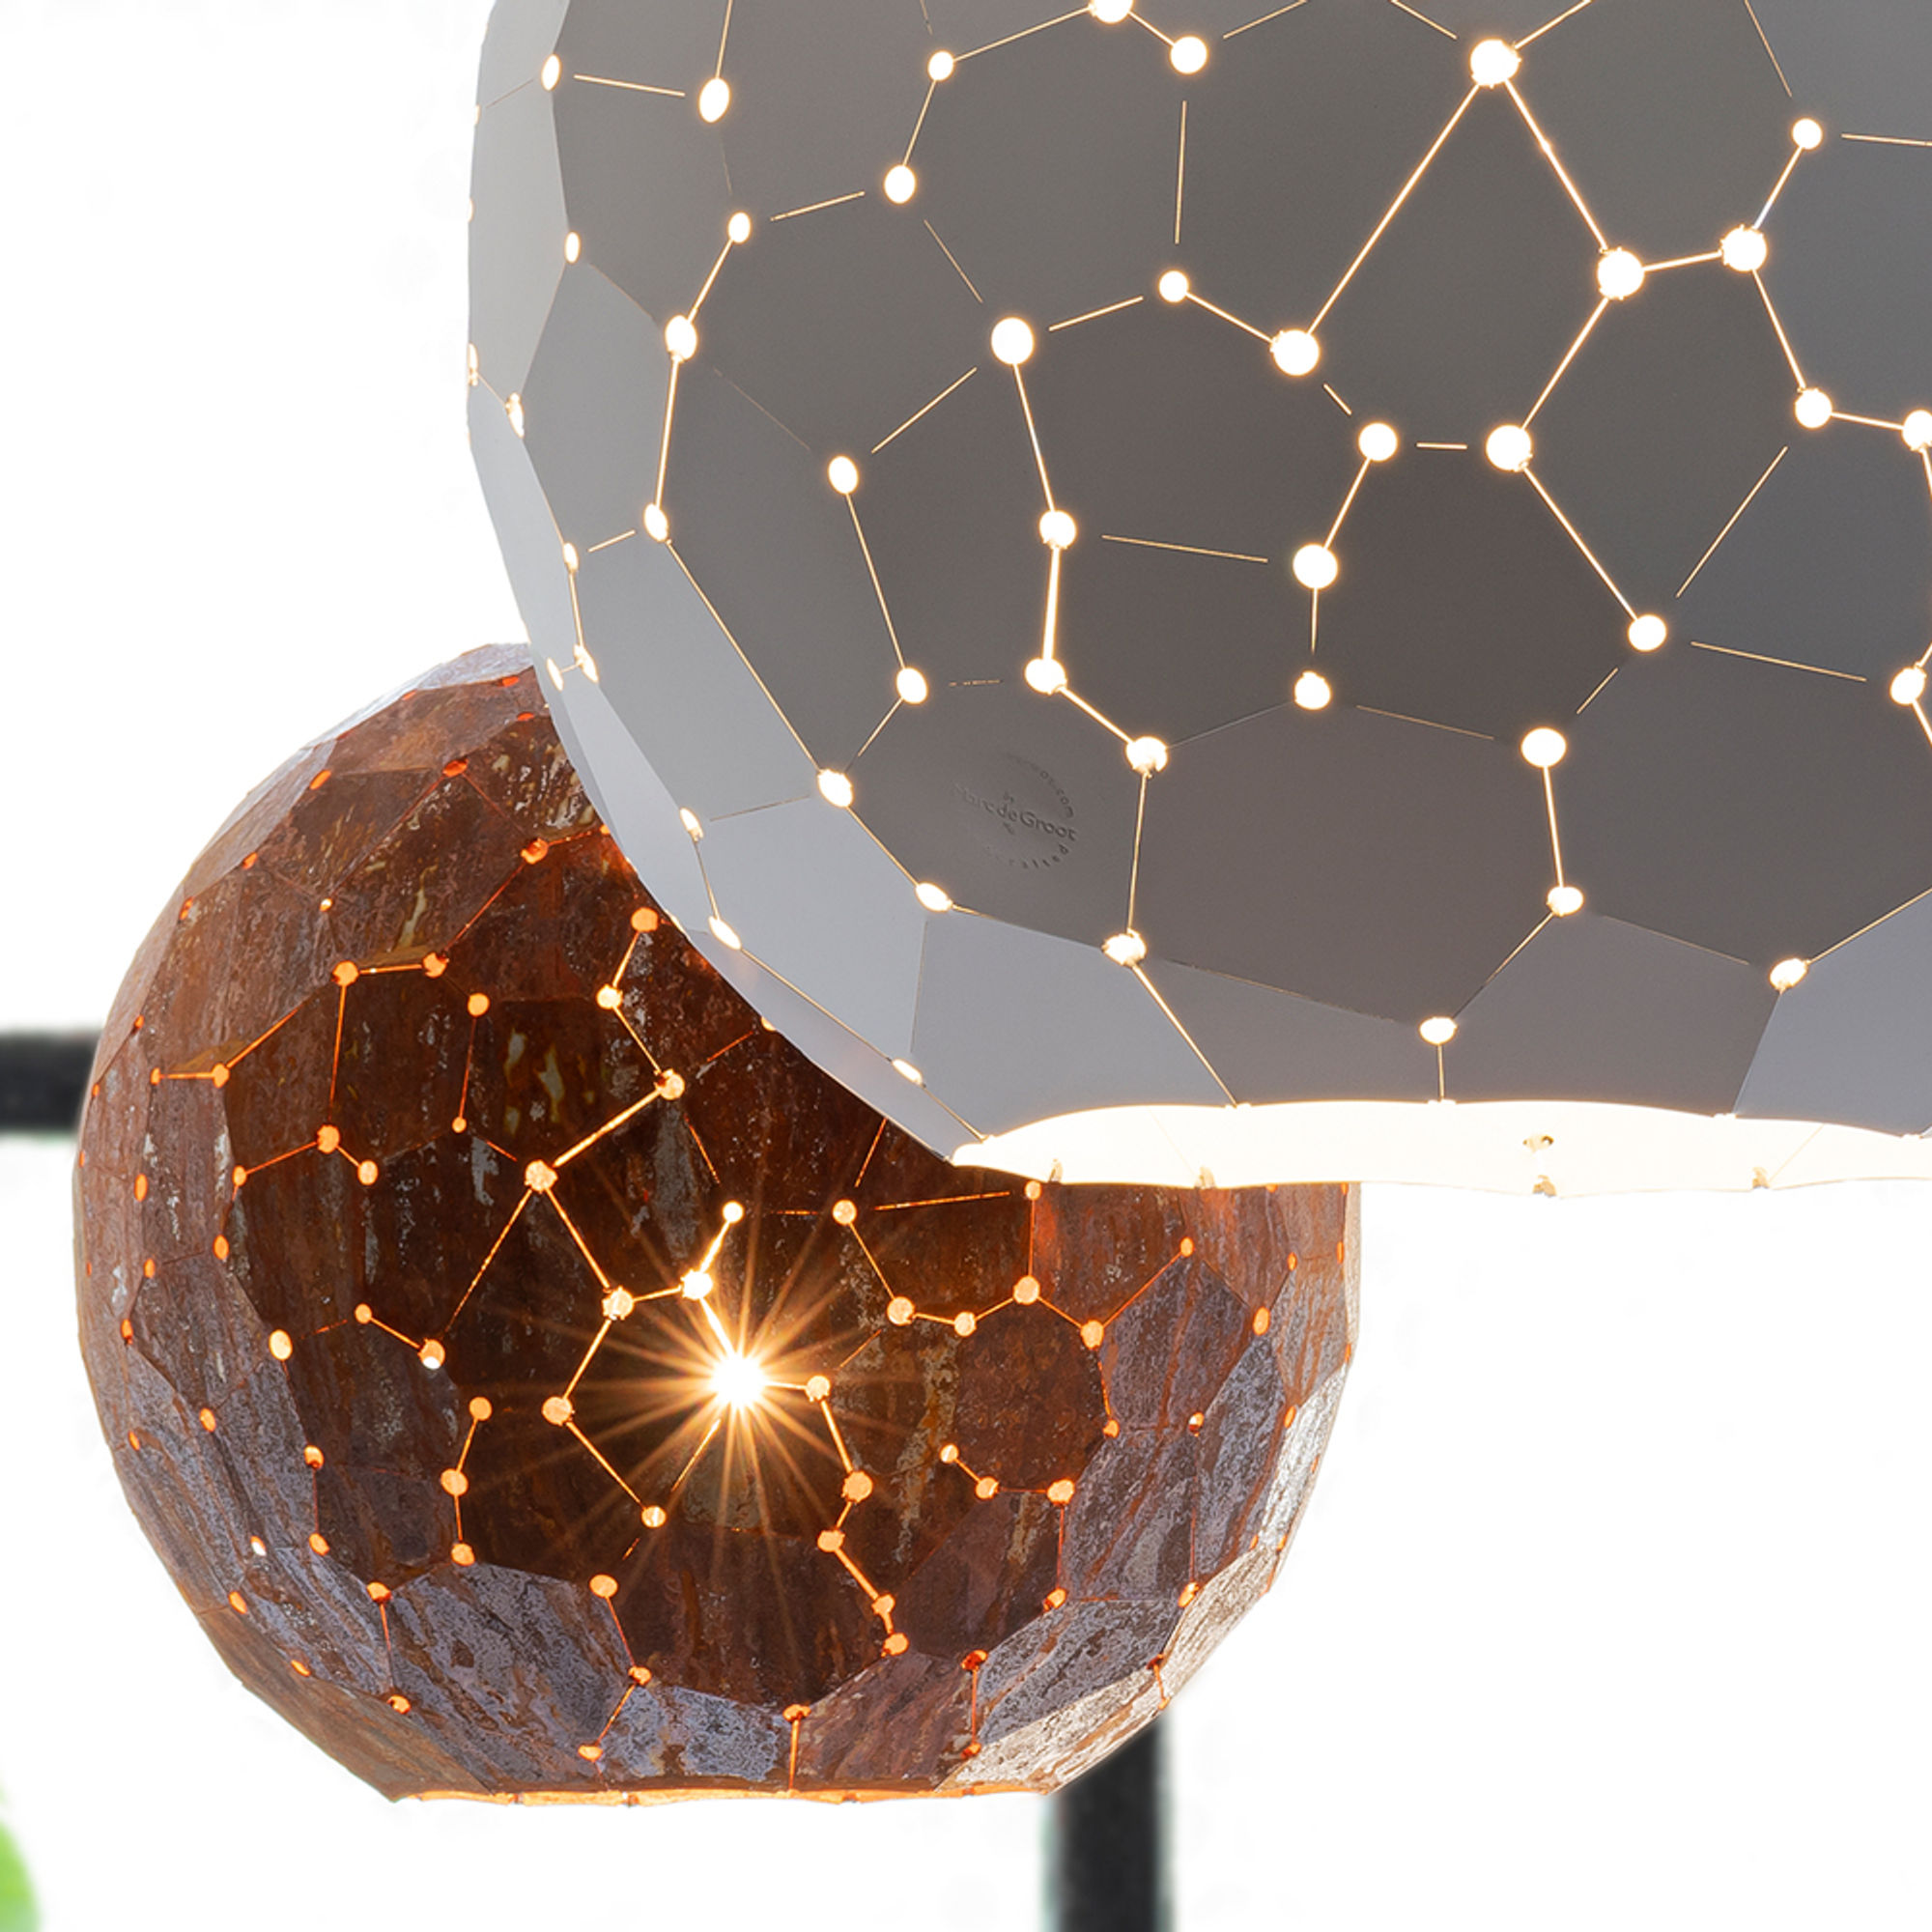 The StarDust 90 Pendant by By Marc de Groot 4